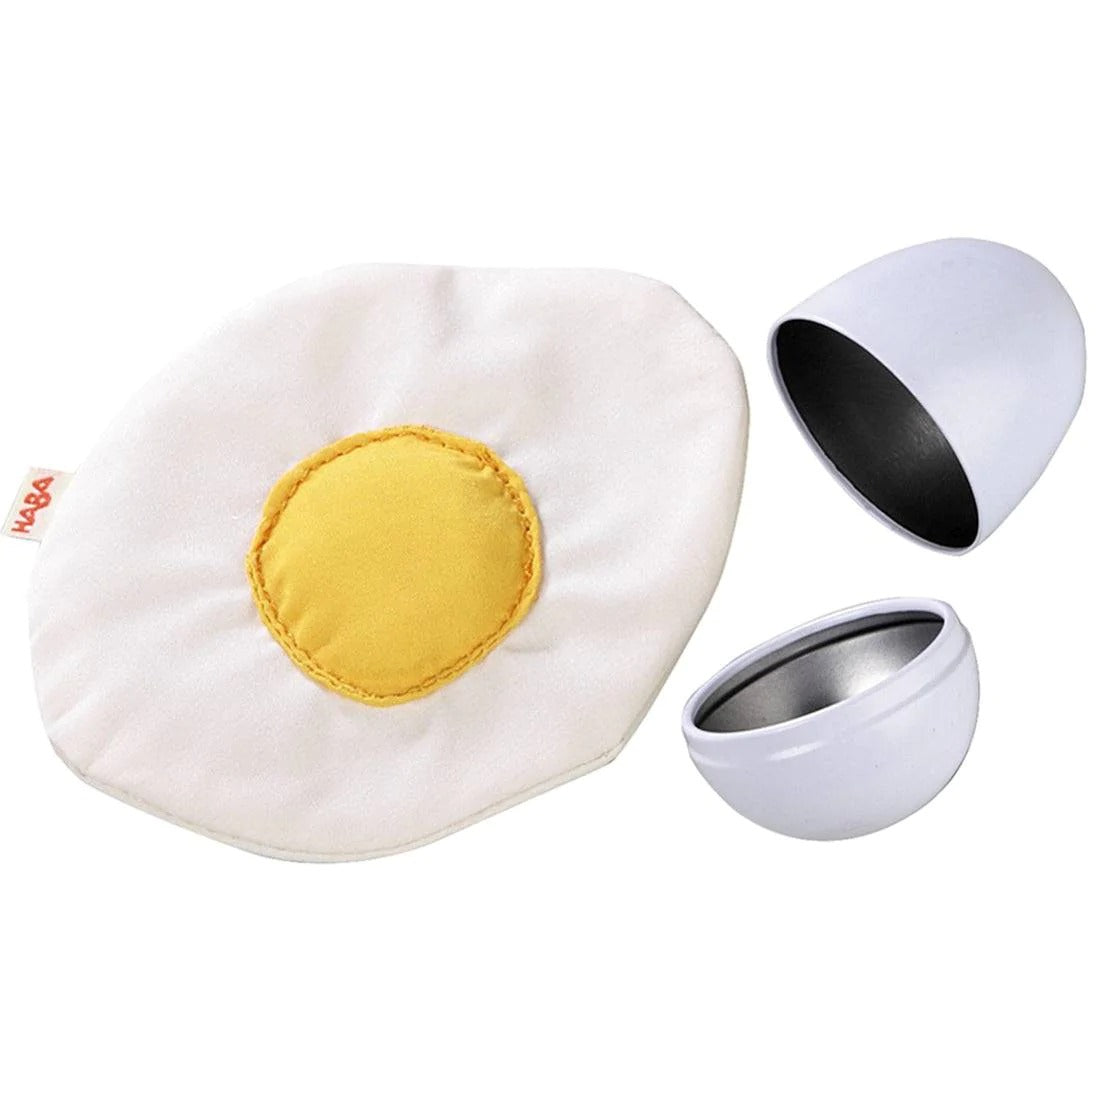 Biofino Fried Egg with Shell Soft Play Food